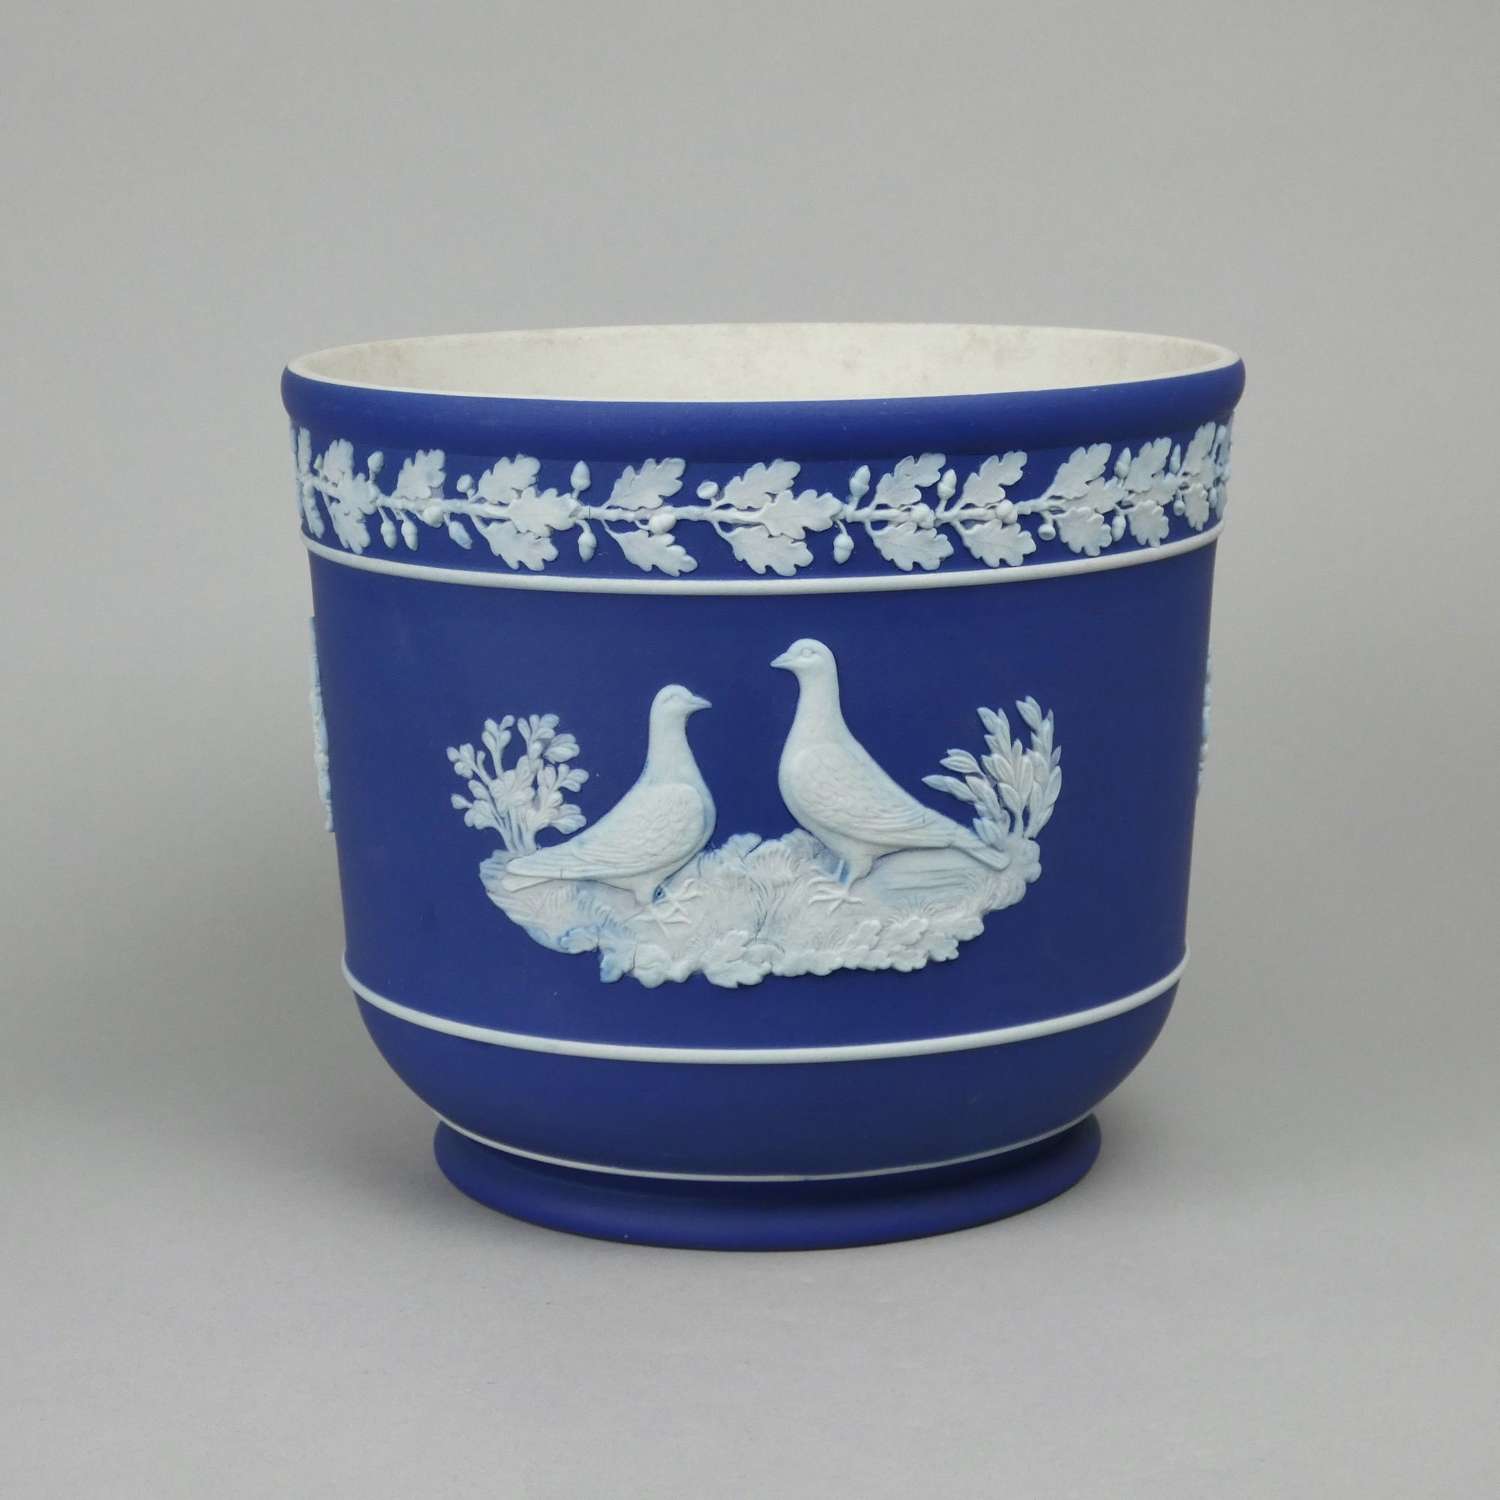 Wedgwood Jardiniere made for Capern's